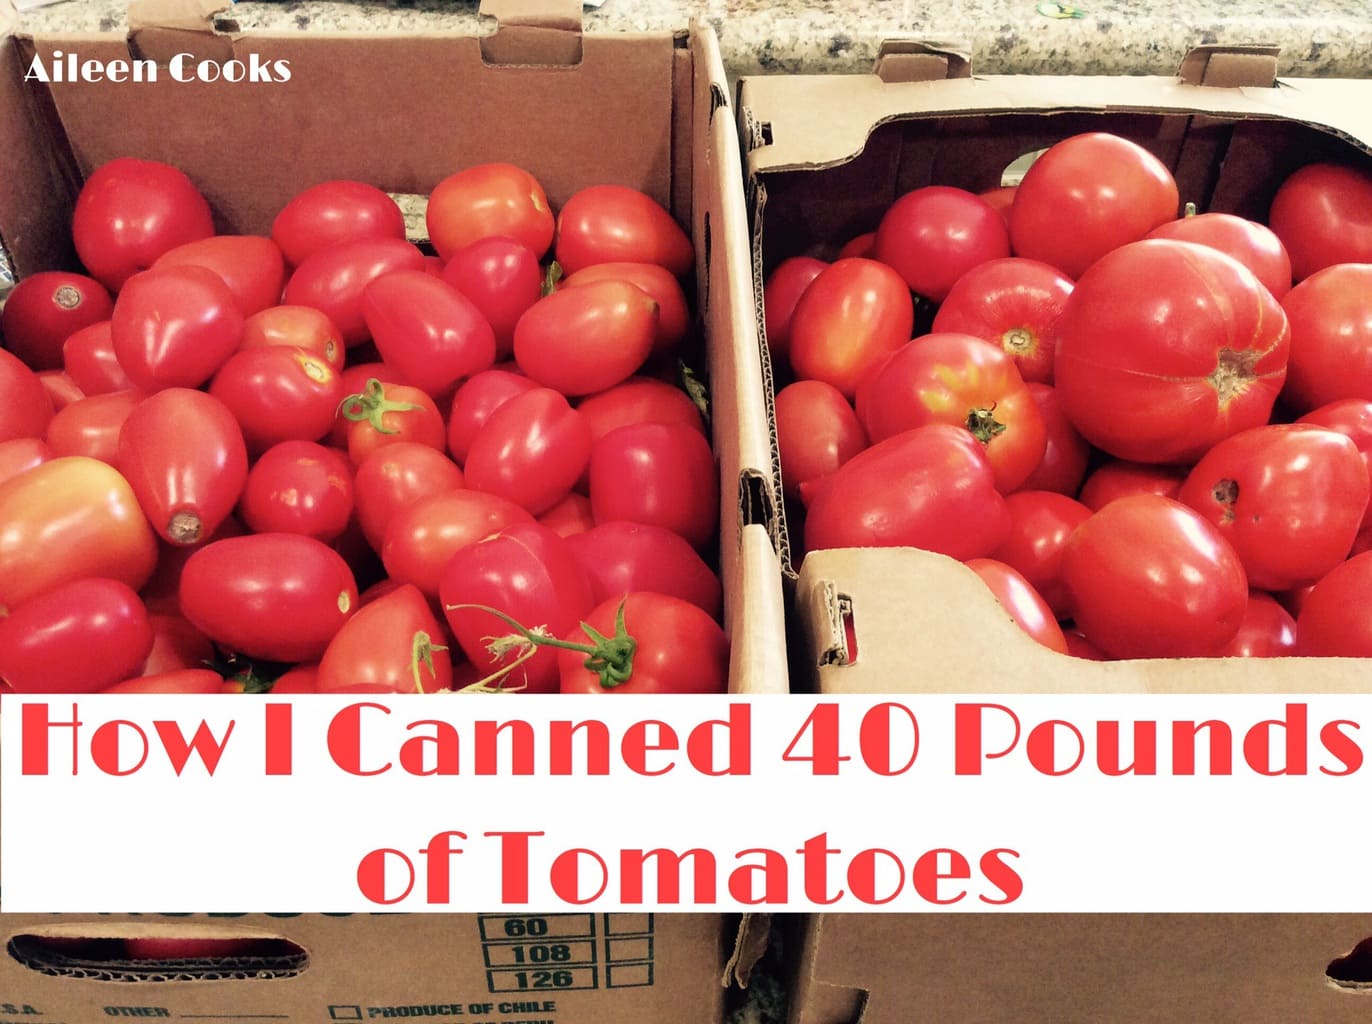 How I canned 40 pounds of tomatoes | Aileen Cooks